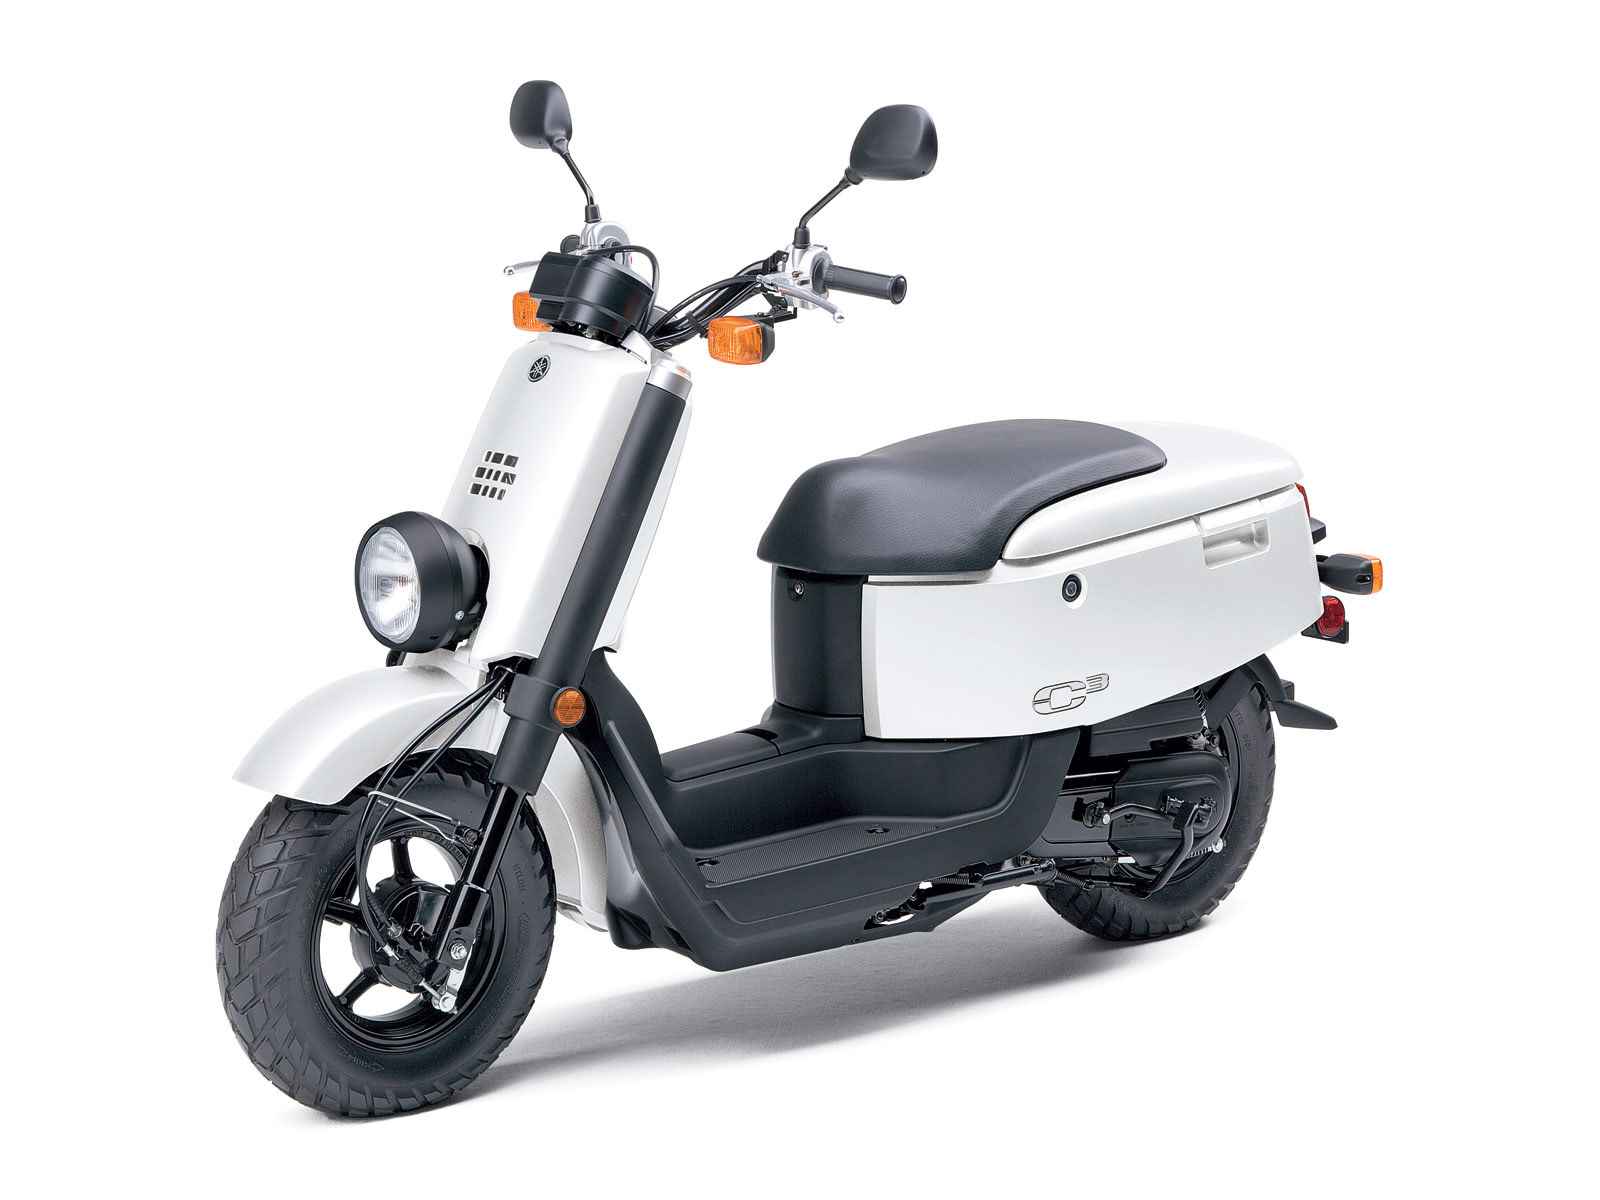 Scooter Wallpaper Specifications Re Features Benefits